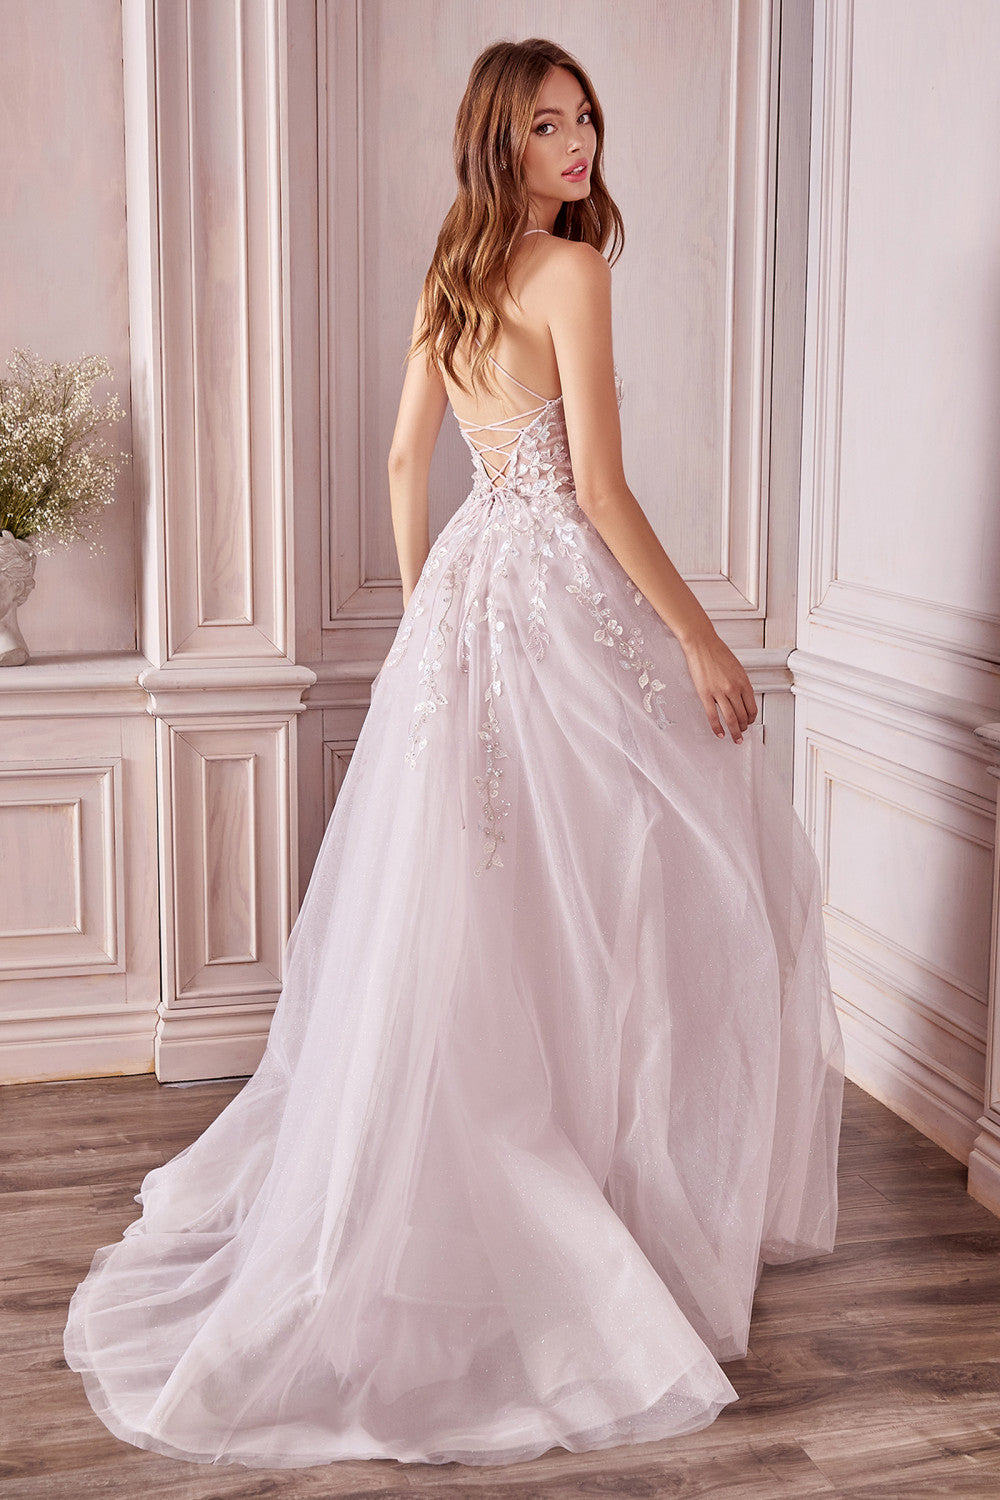 Mary Floral Gown by Andrea and Leo -A1019